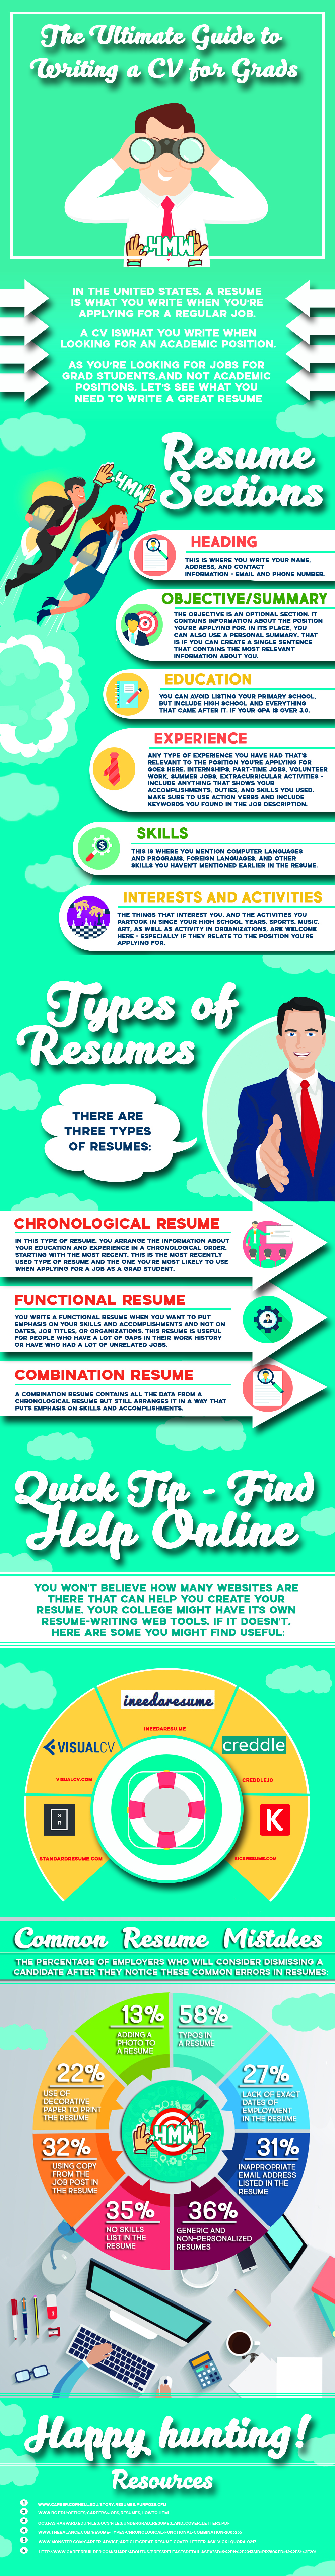 The Grad’s Ultimate Guide For Finding A Job Infographic